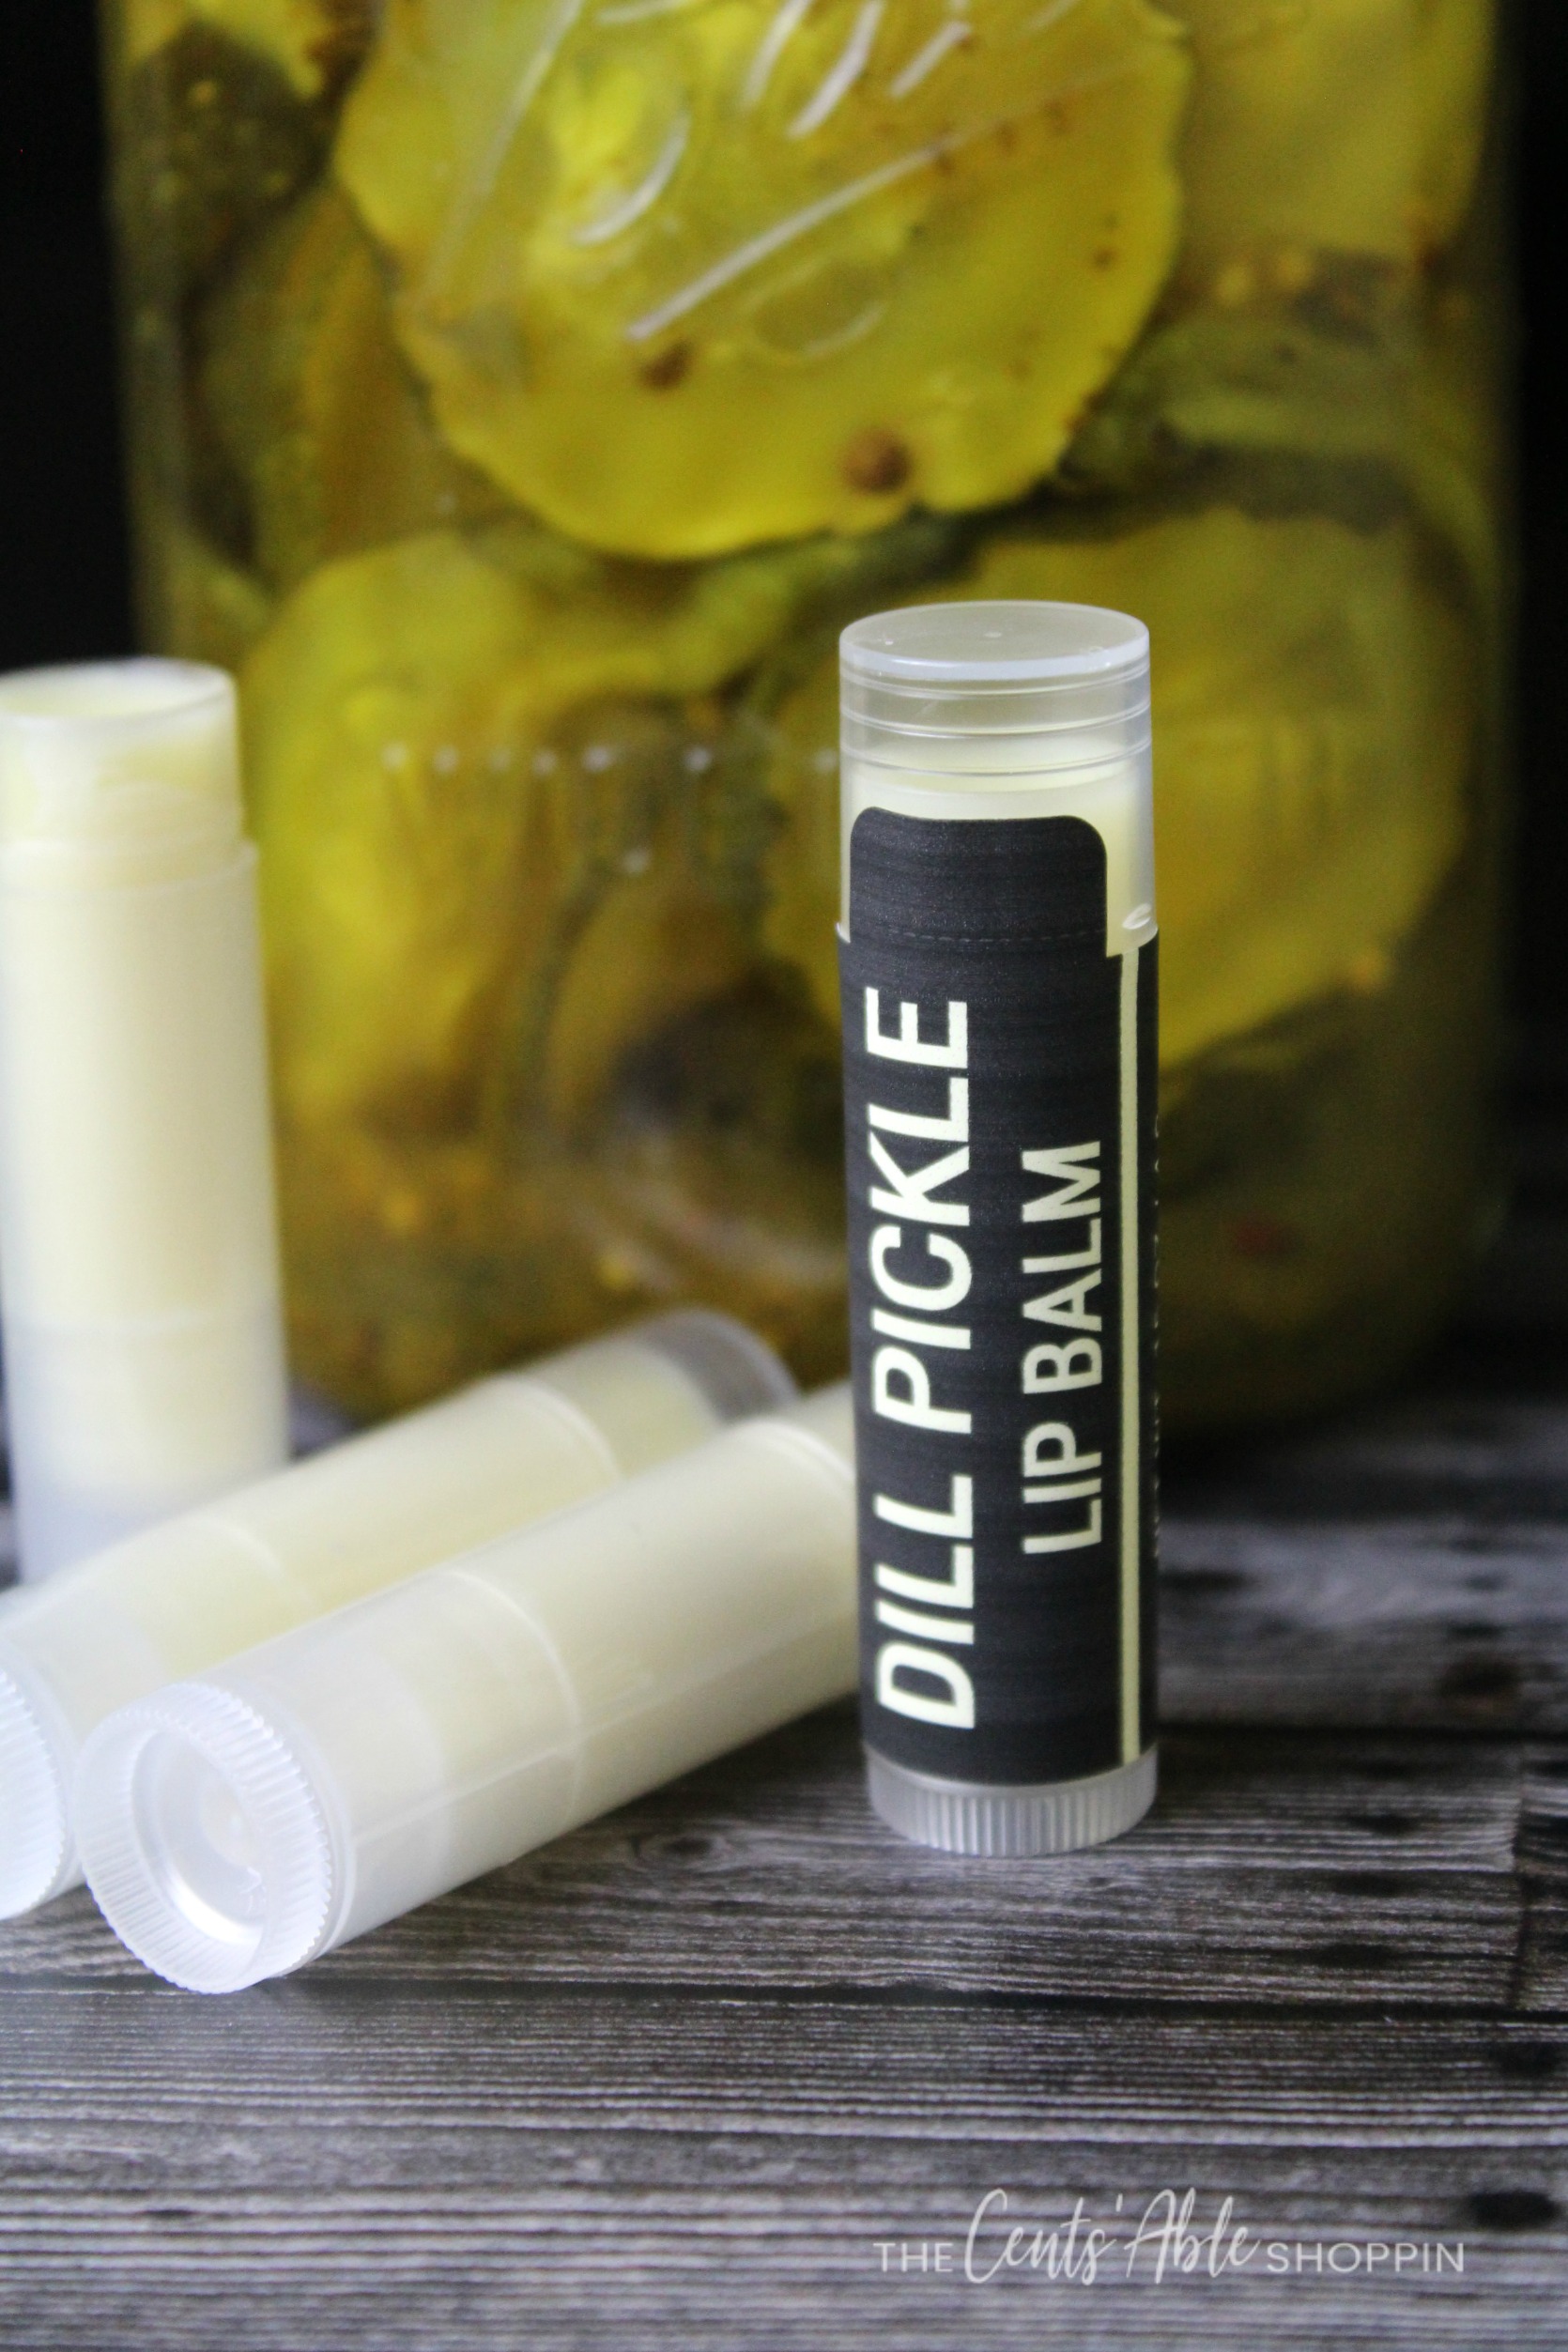 This Dill Pickle Lip Balm is easy to throw together with simple ingredients that come together to make the ideal gift for anyone crazy about dill pickles!